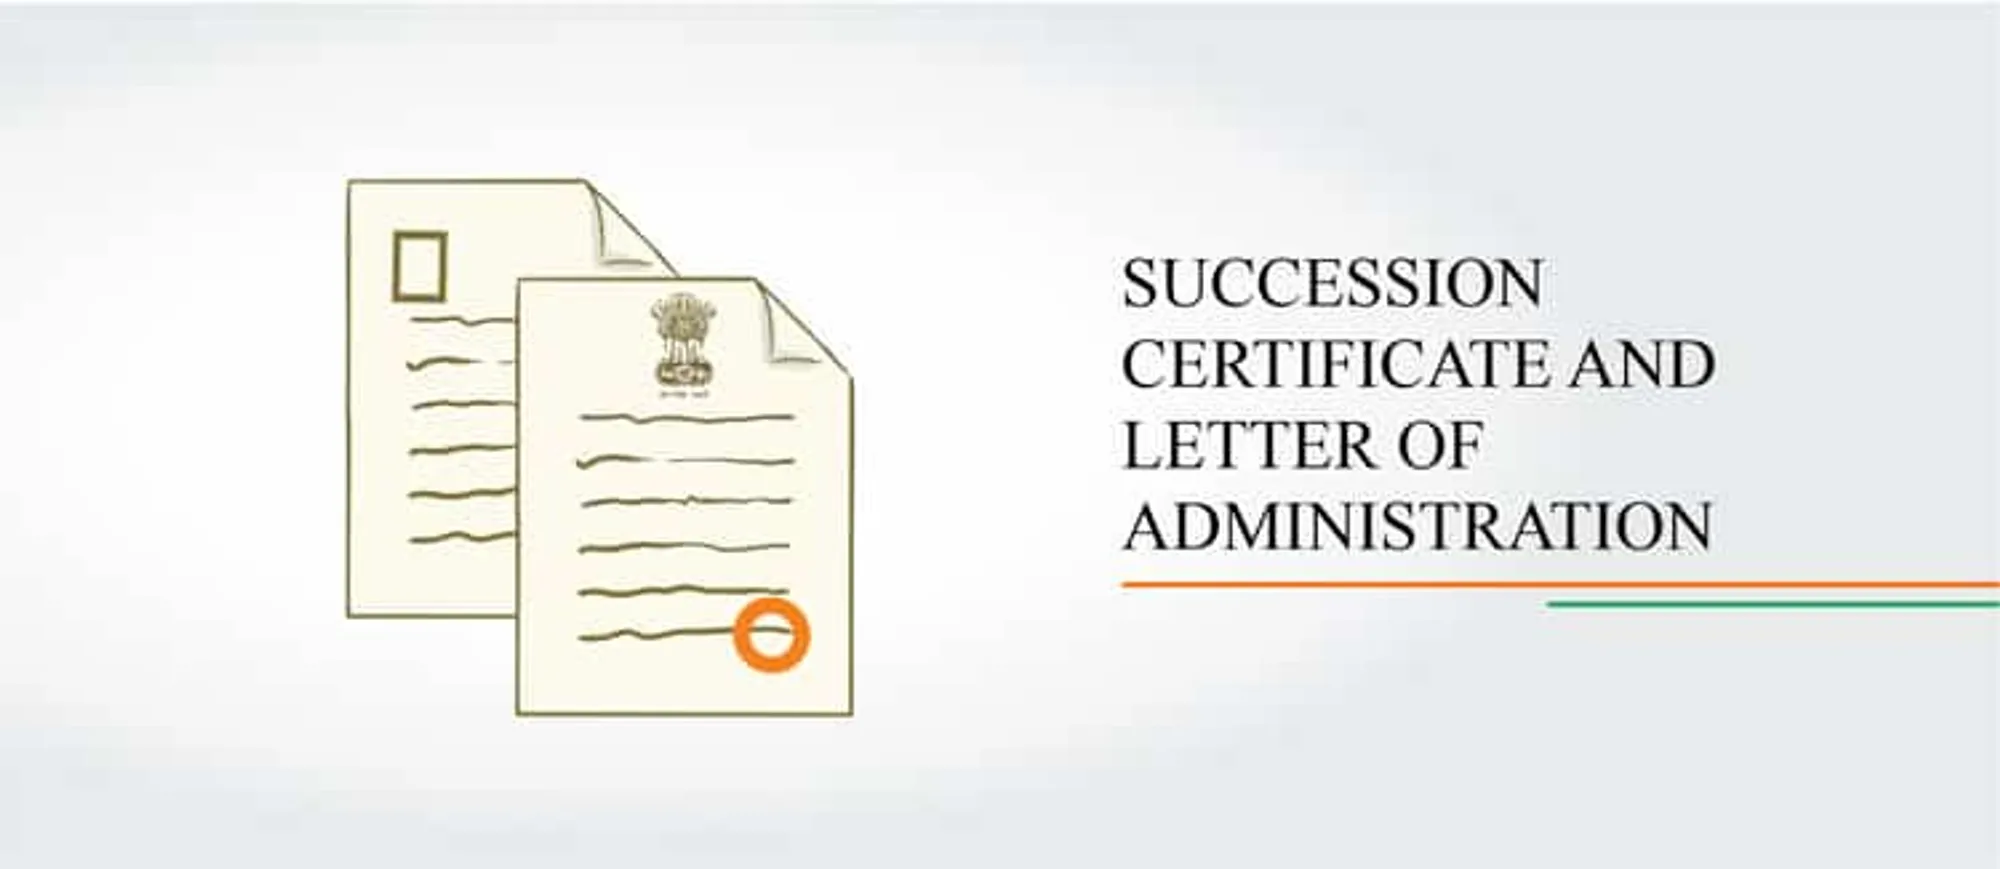 Succession Certificate and Letter of Administration